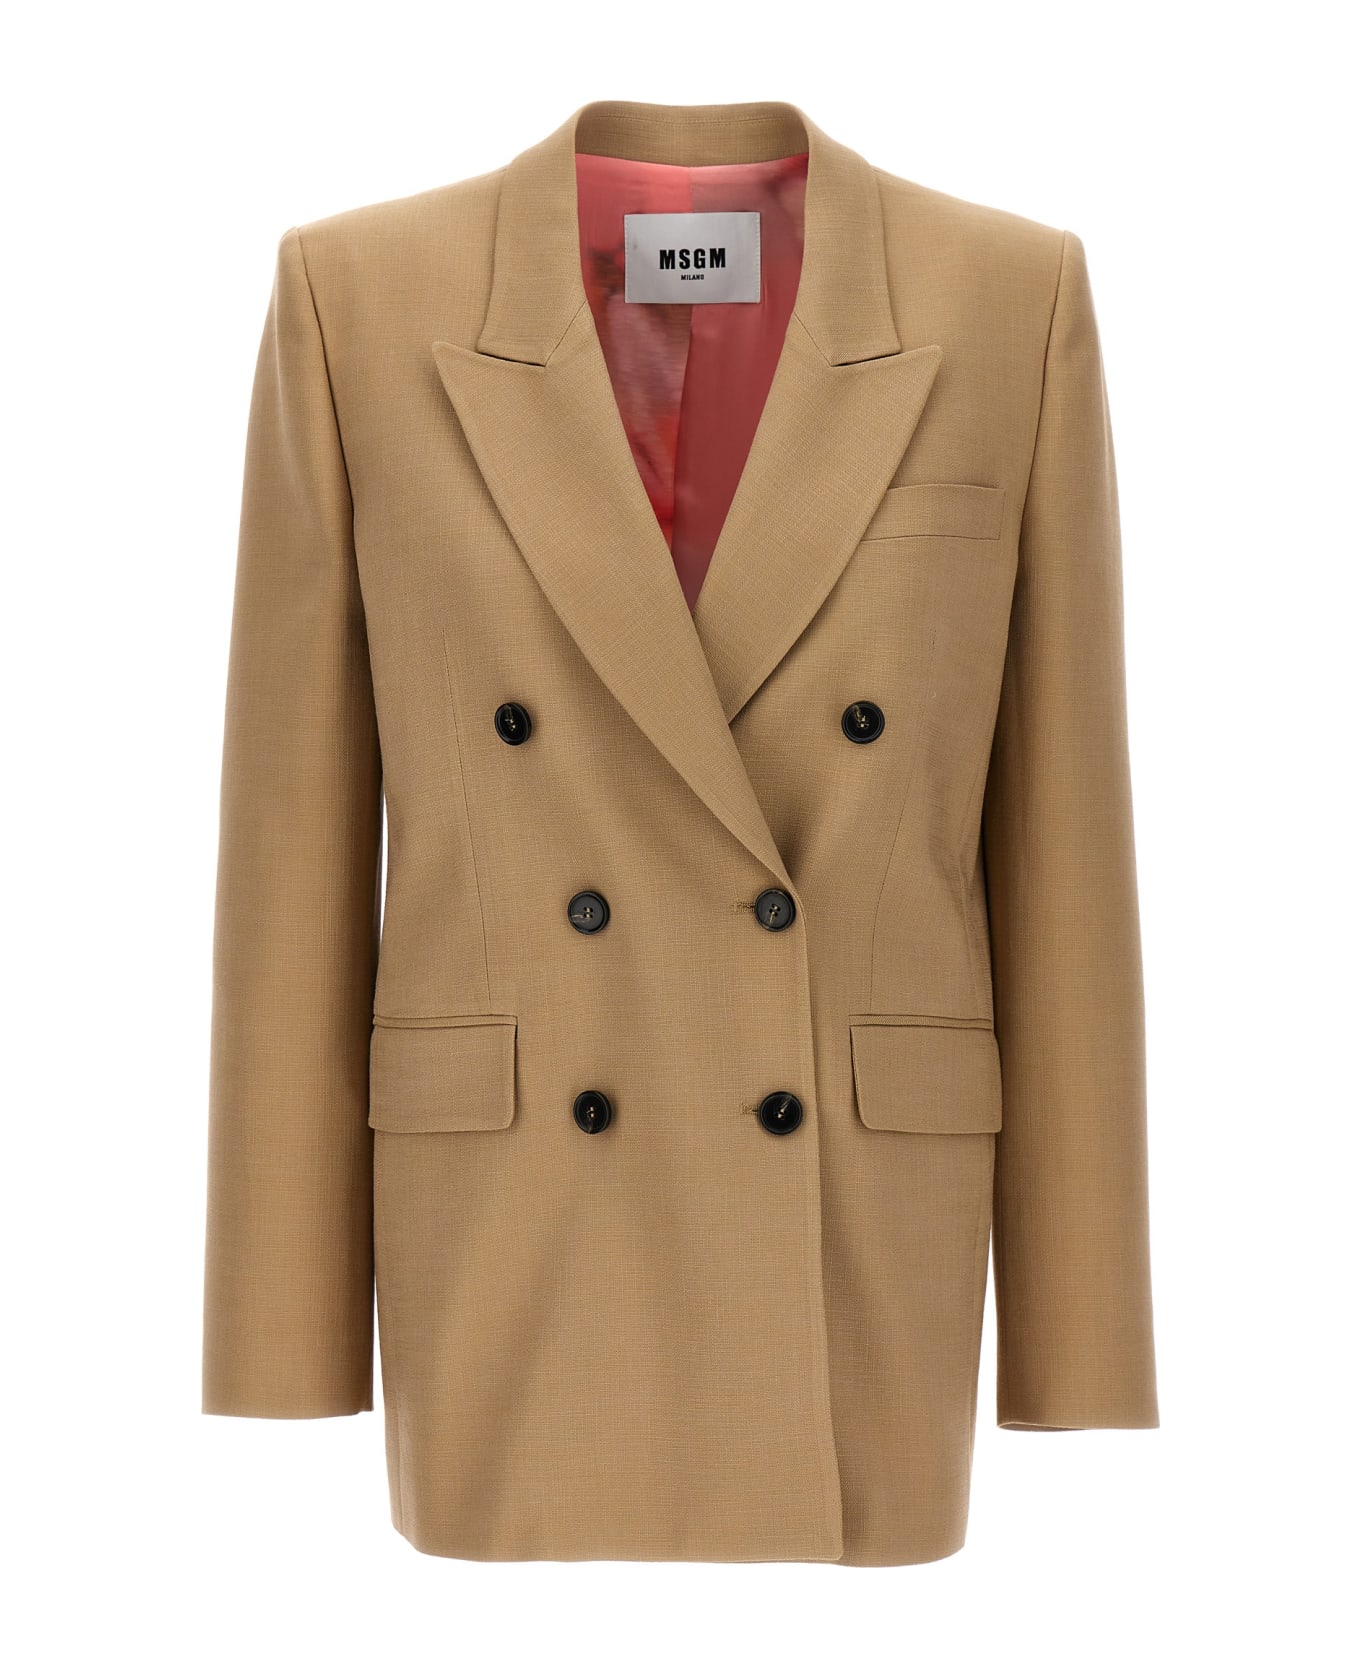 MSGM Double-breasted Blazer - Beige コート